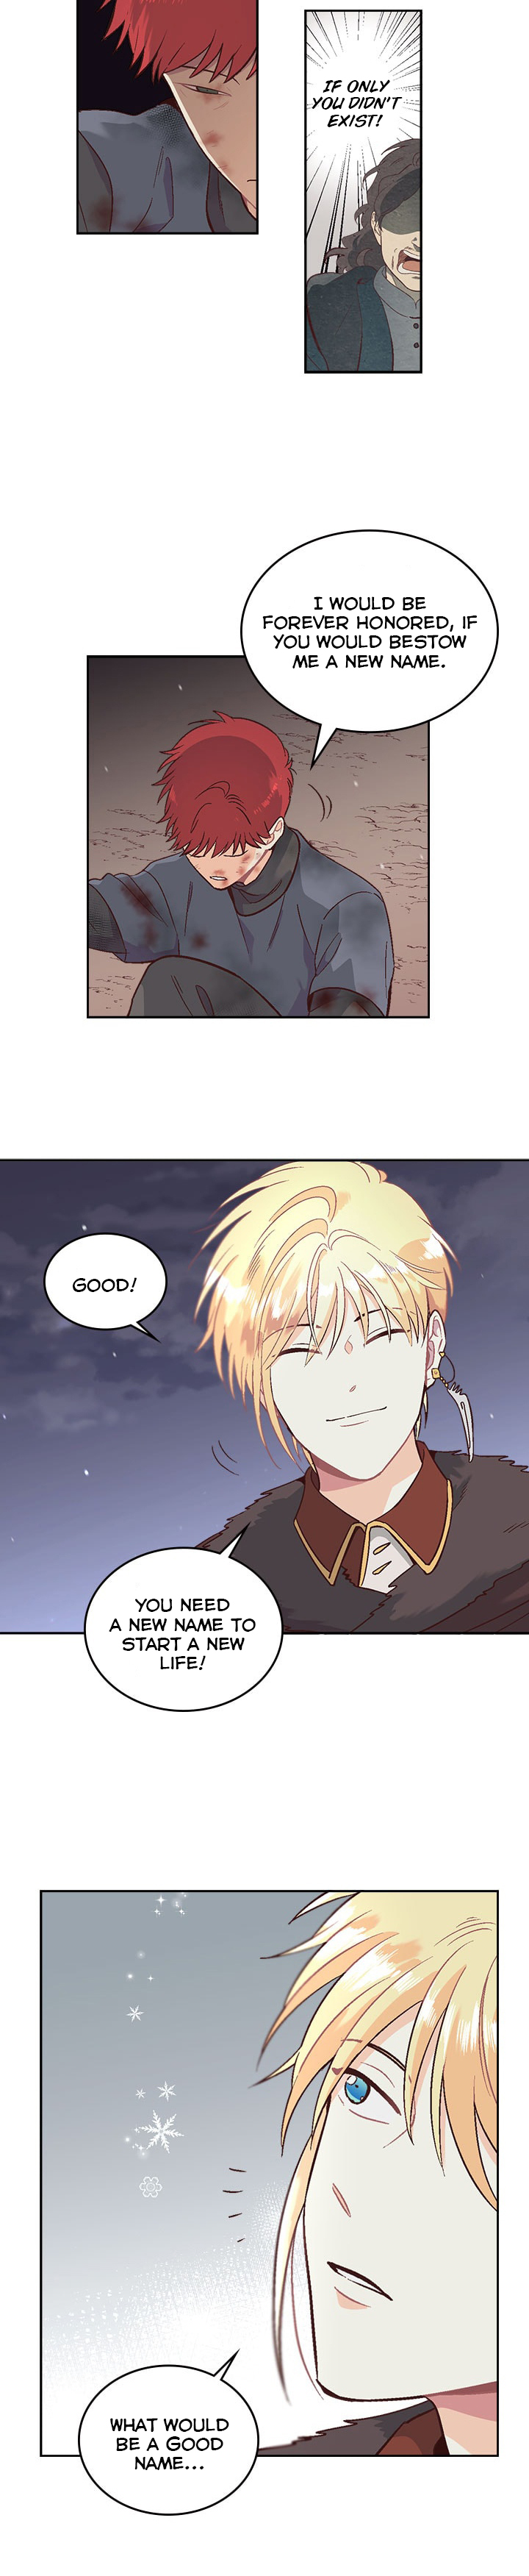 Emperor And The Female Knight Ch. 8